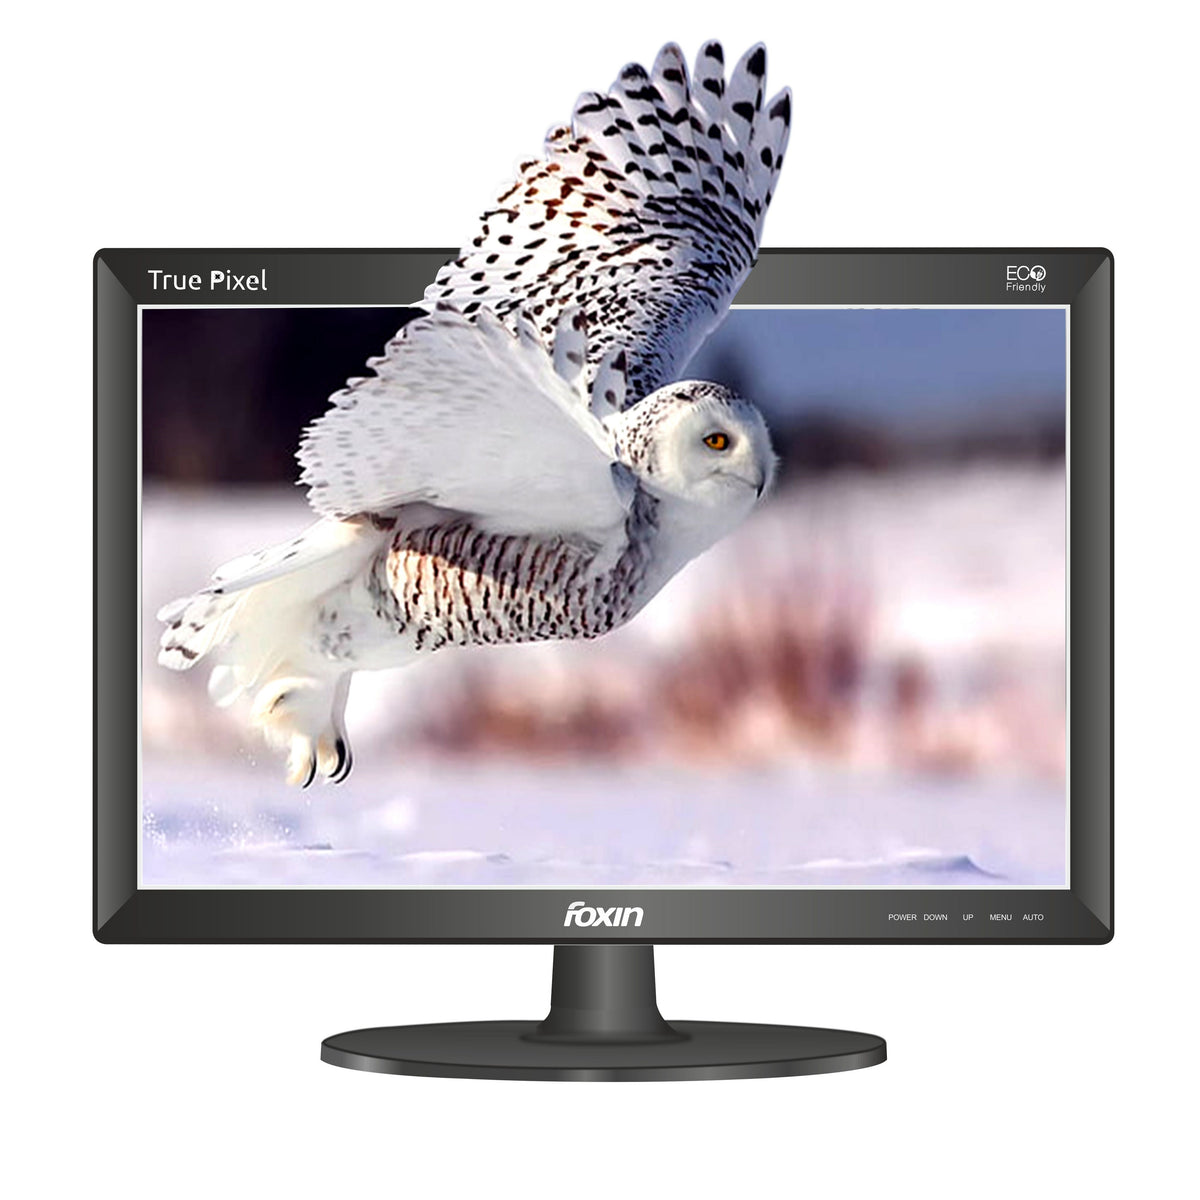 Foxin FM 1540 Crystal HDMI Monitor with VGA, 1366x768 Resolution and VESA Mount